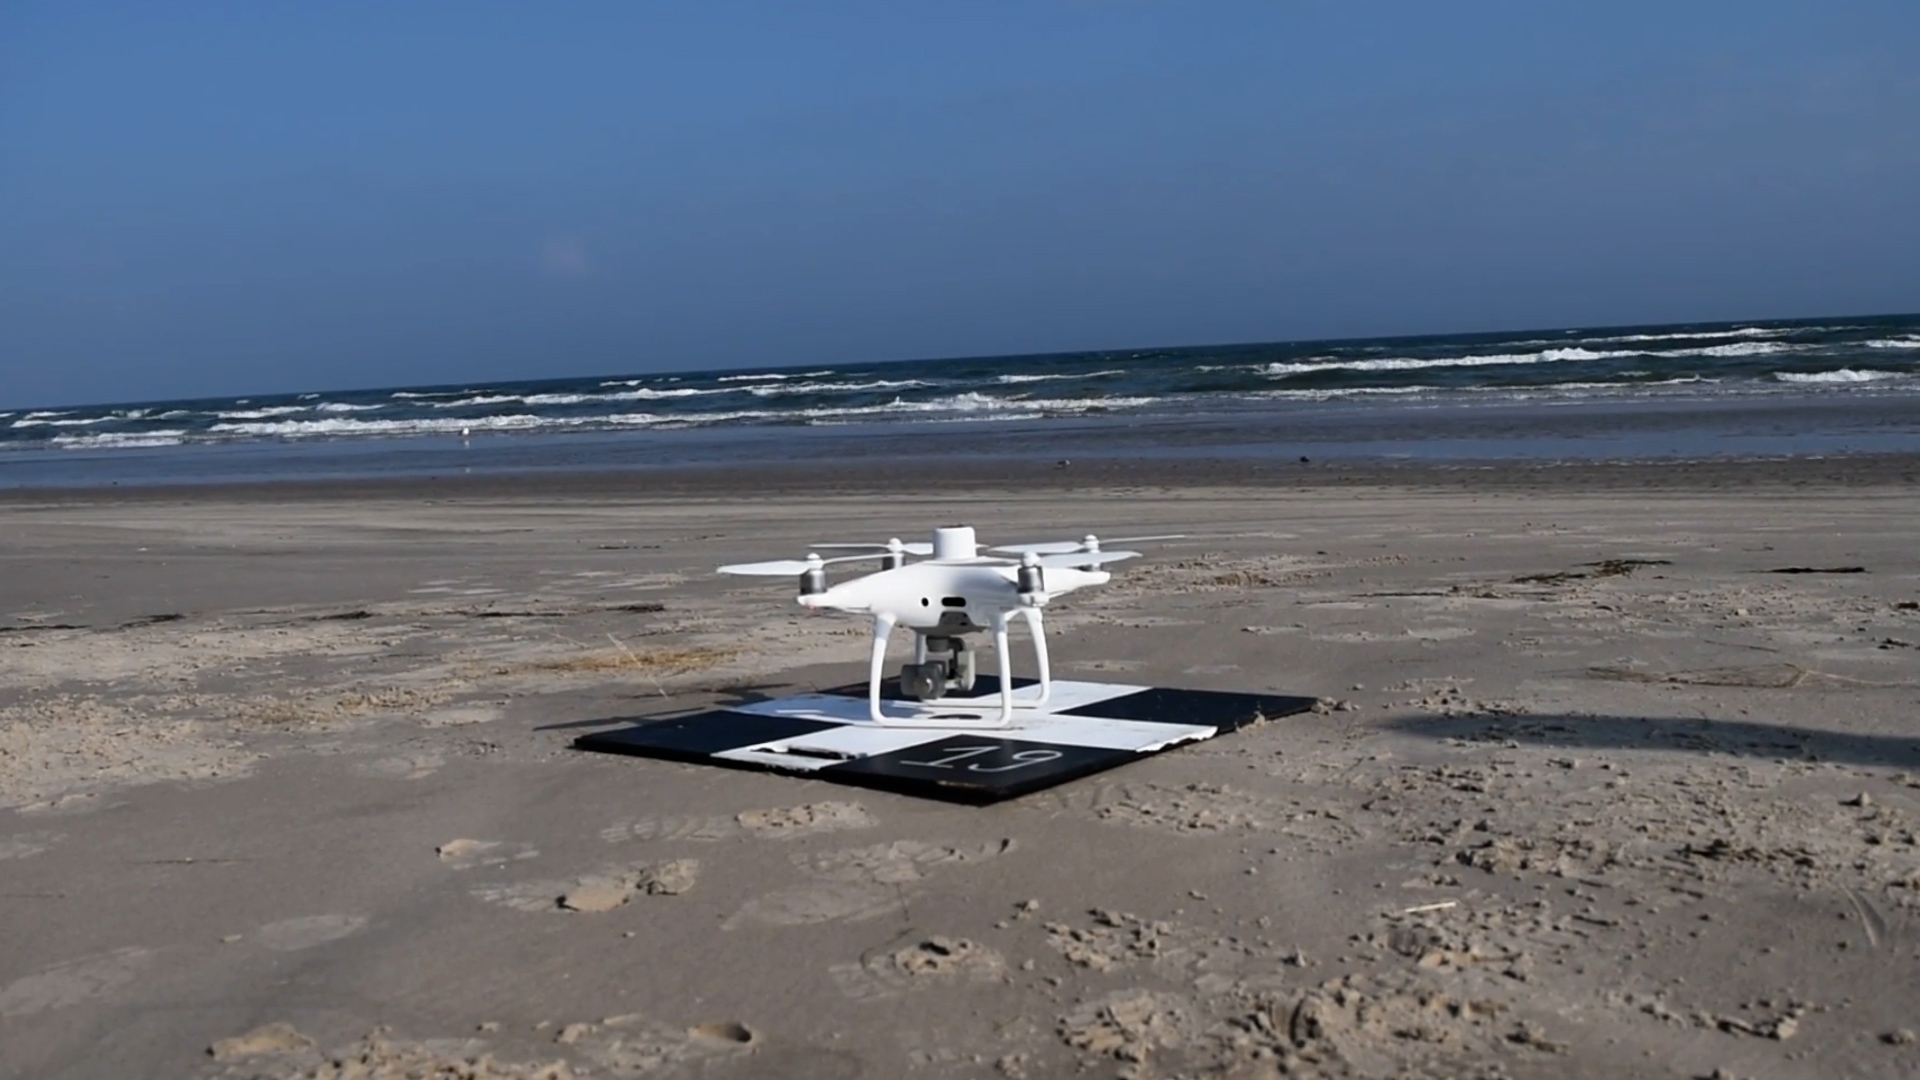 Aerial drone about to take off at beach near Corpus Christi, Texas, December 2021.